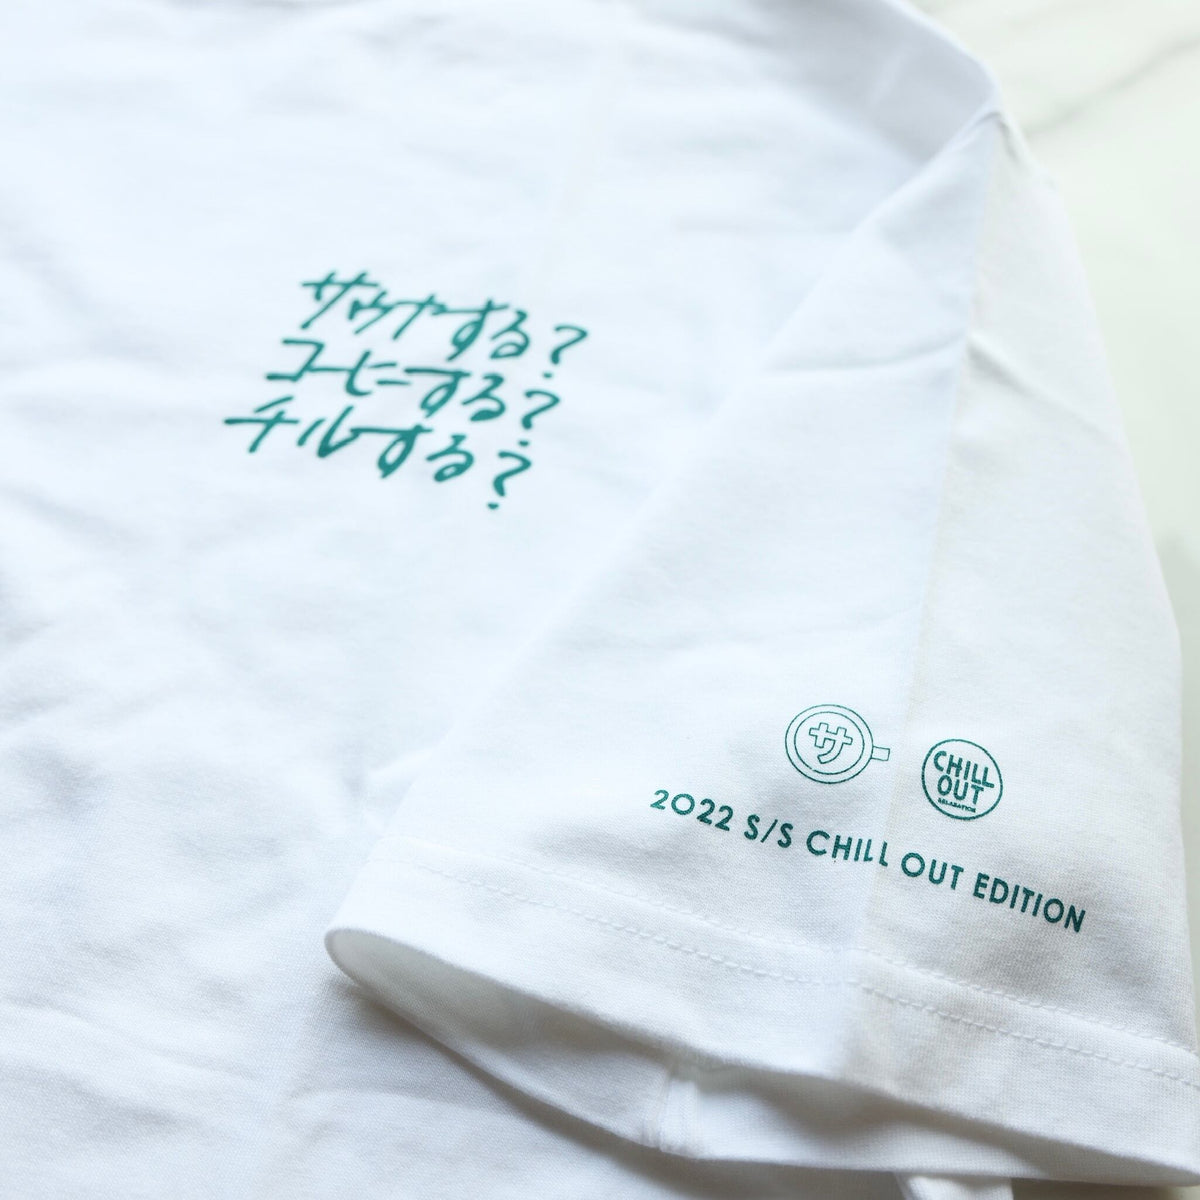 CHILL OUTモデル コーヒーサウナーズTシャツ WHITE 2022S/S Limited edition